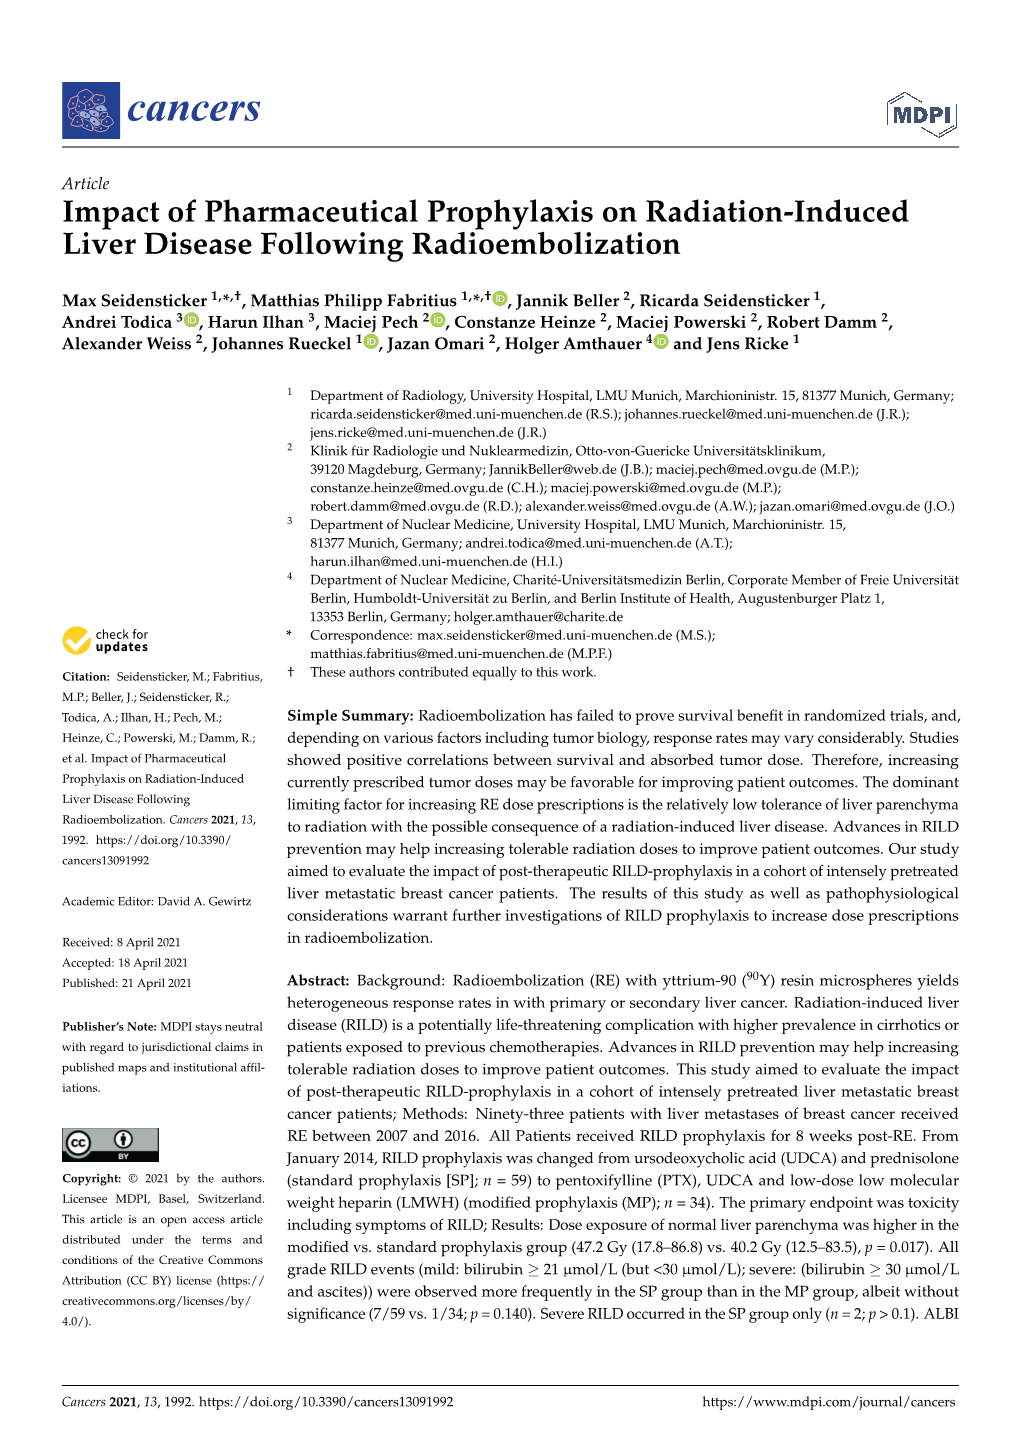 Impact of Pharmaceutical Prophylaxis on Radiation-Induced Liver Disease Following Radioembolization